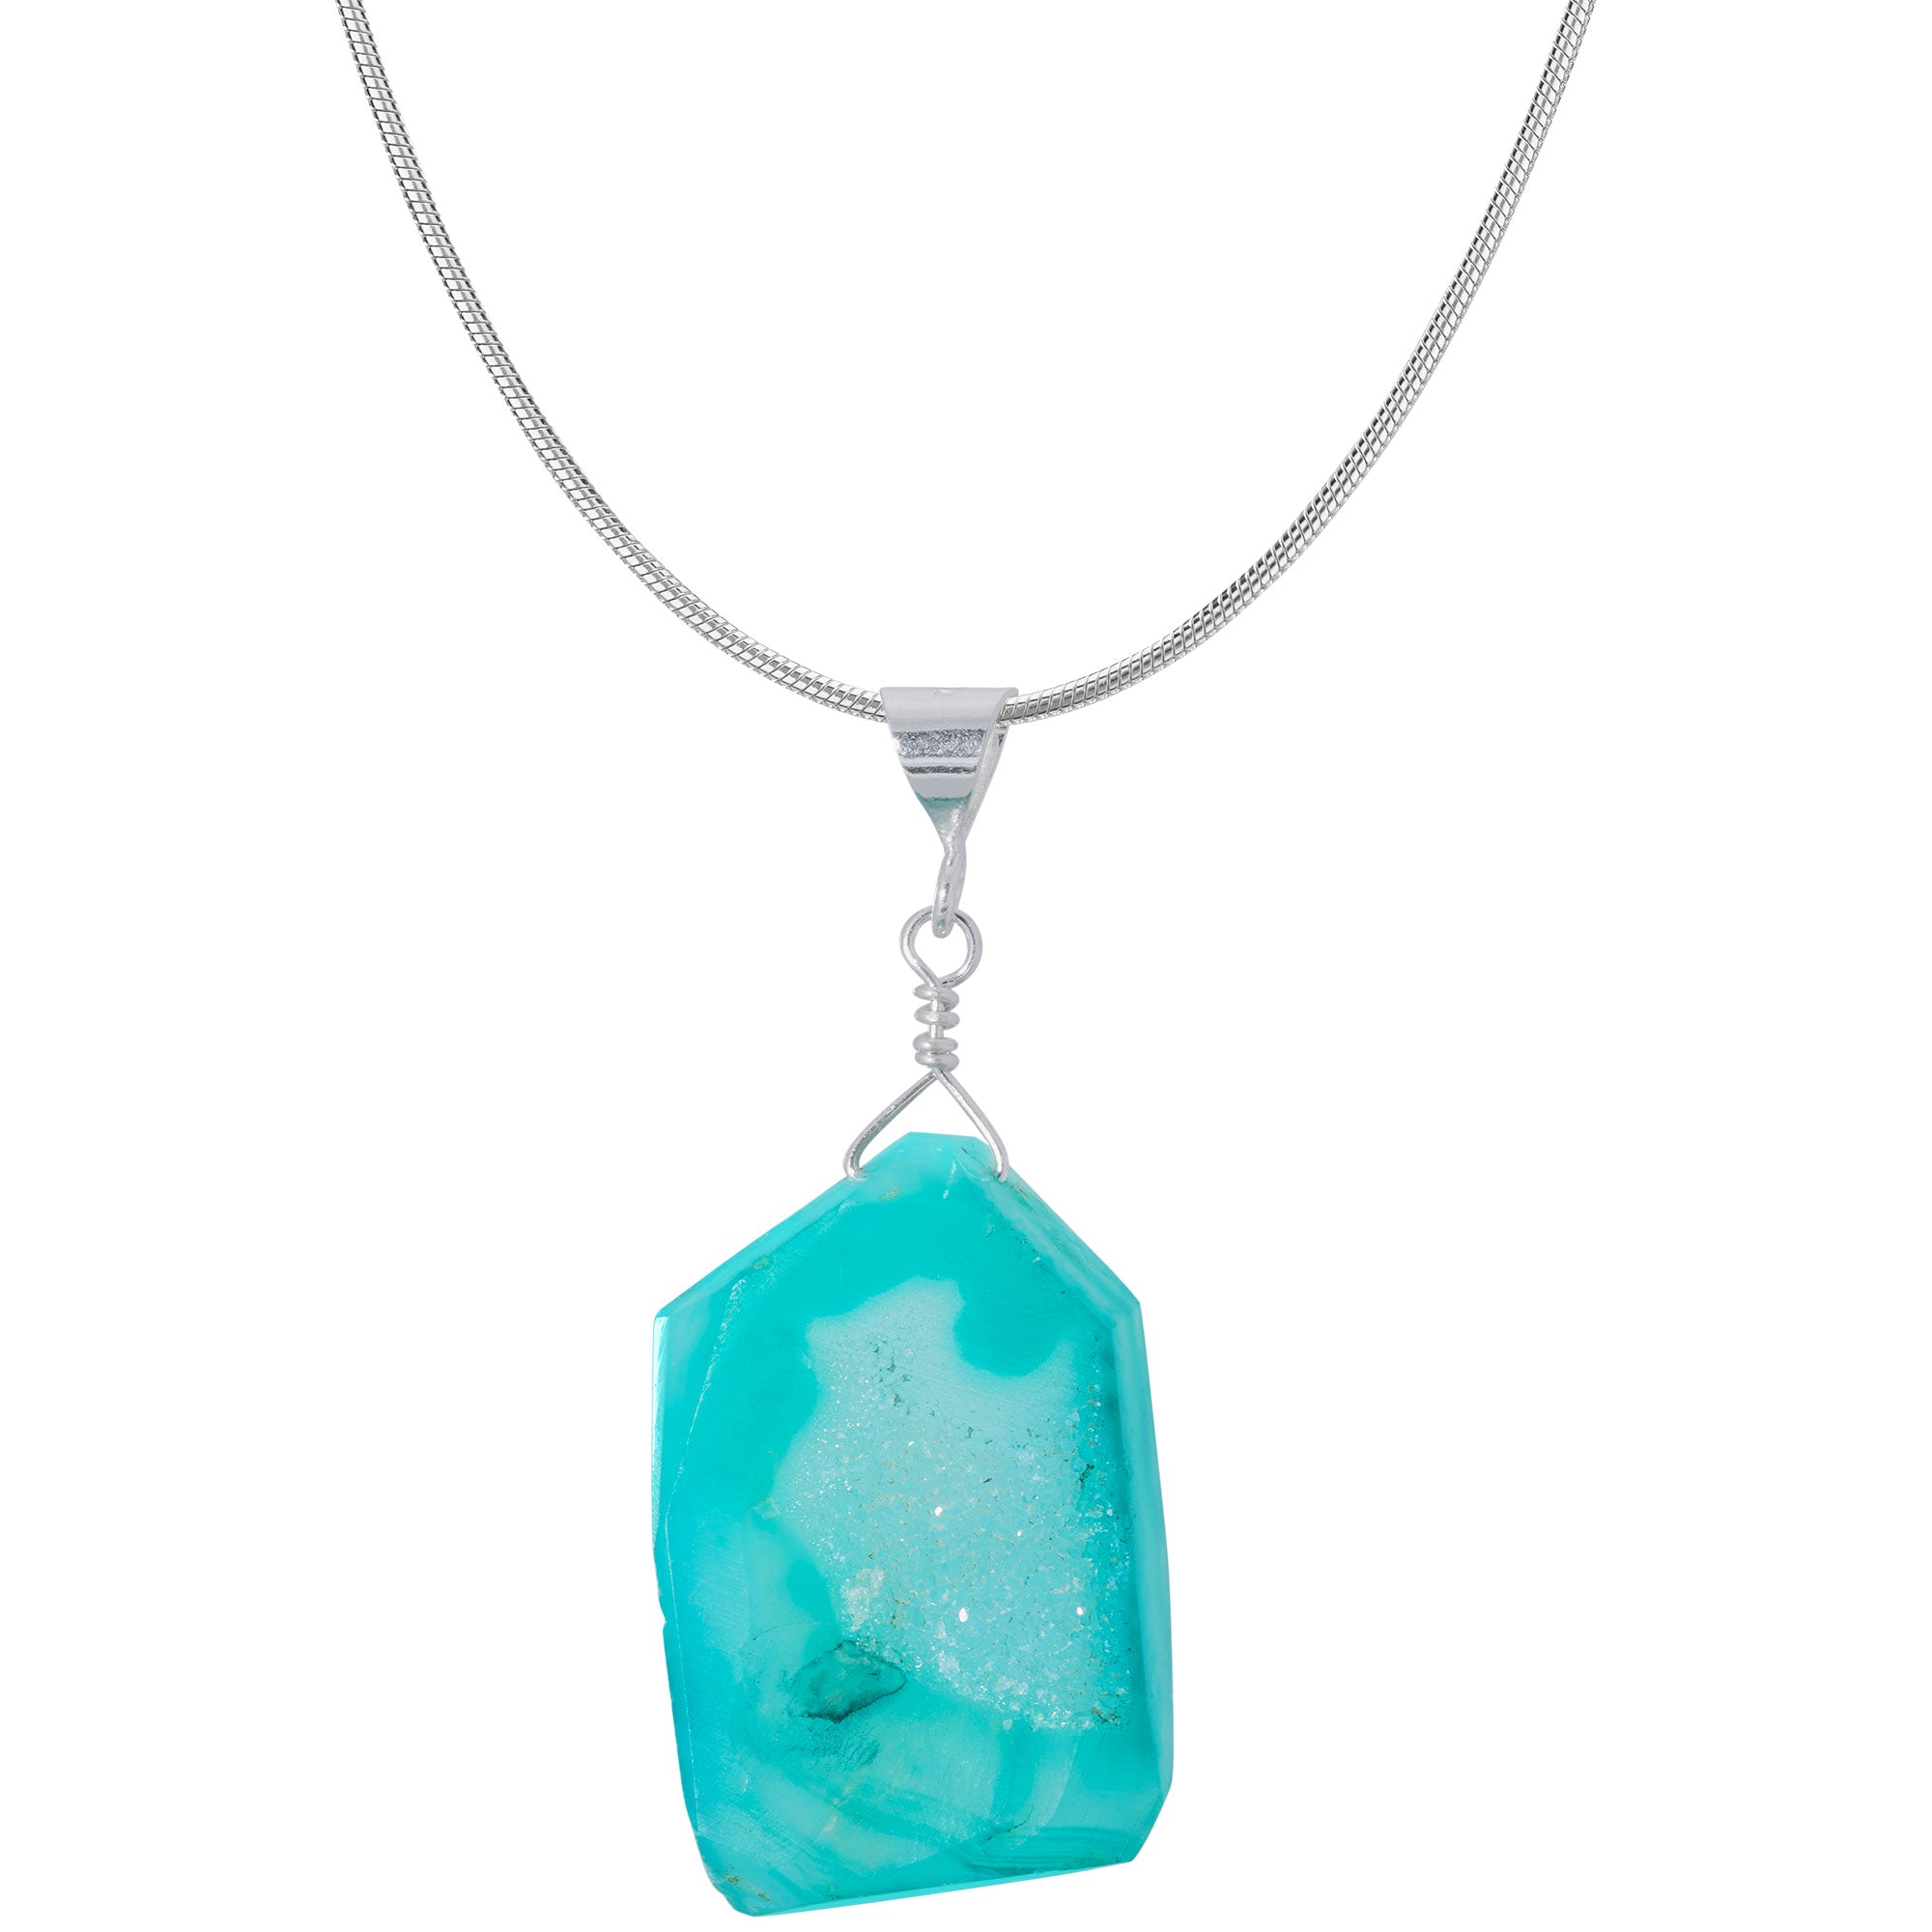 Cool Hues Sterling Silver & Druzy Necklace - Emerald Green - Pendant Only